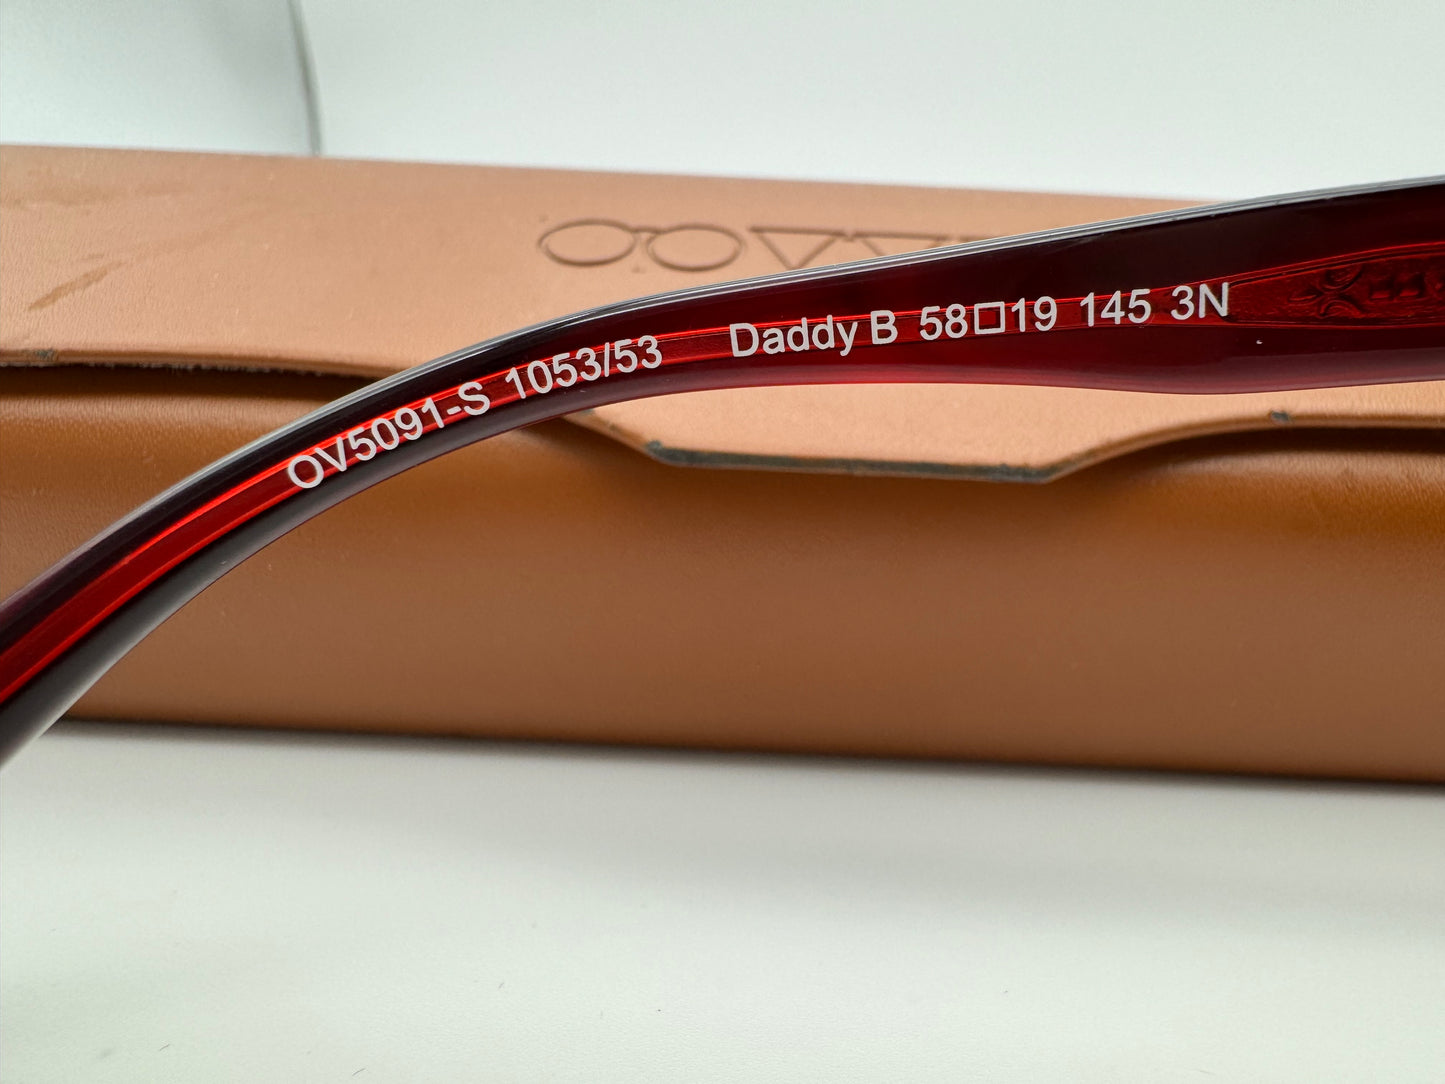 Oliver Peoples Daddy B 58mm OV 5091 1053/53 Red Havana Brown Lens Preowned RARE